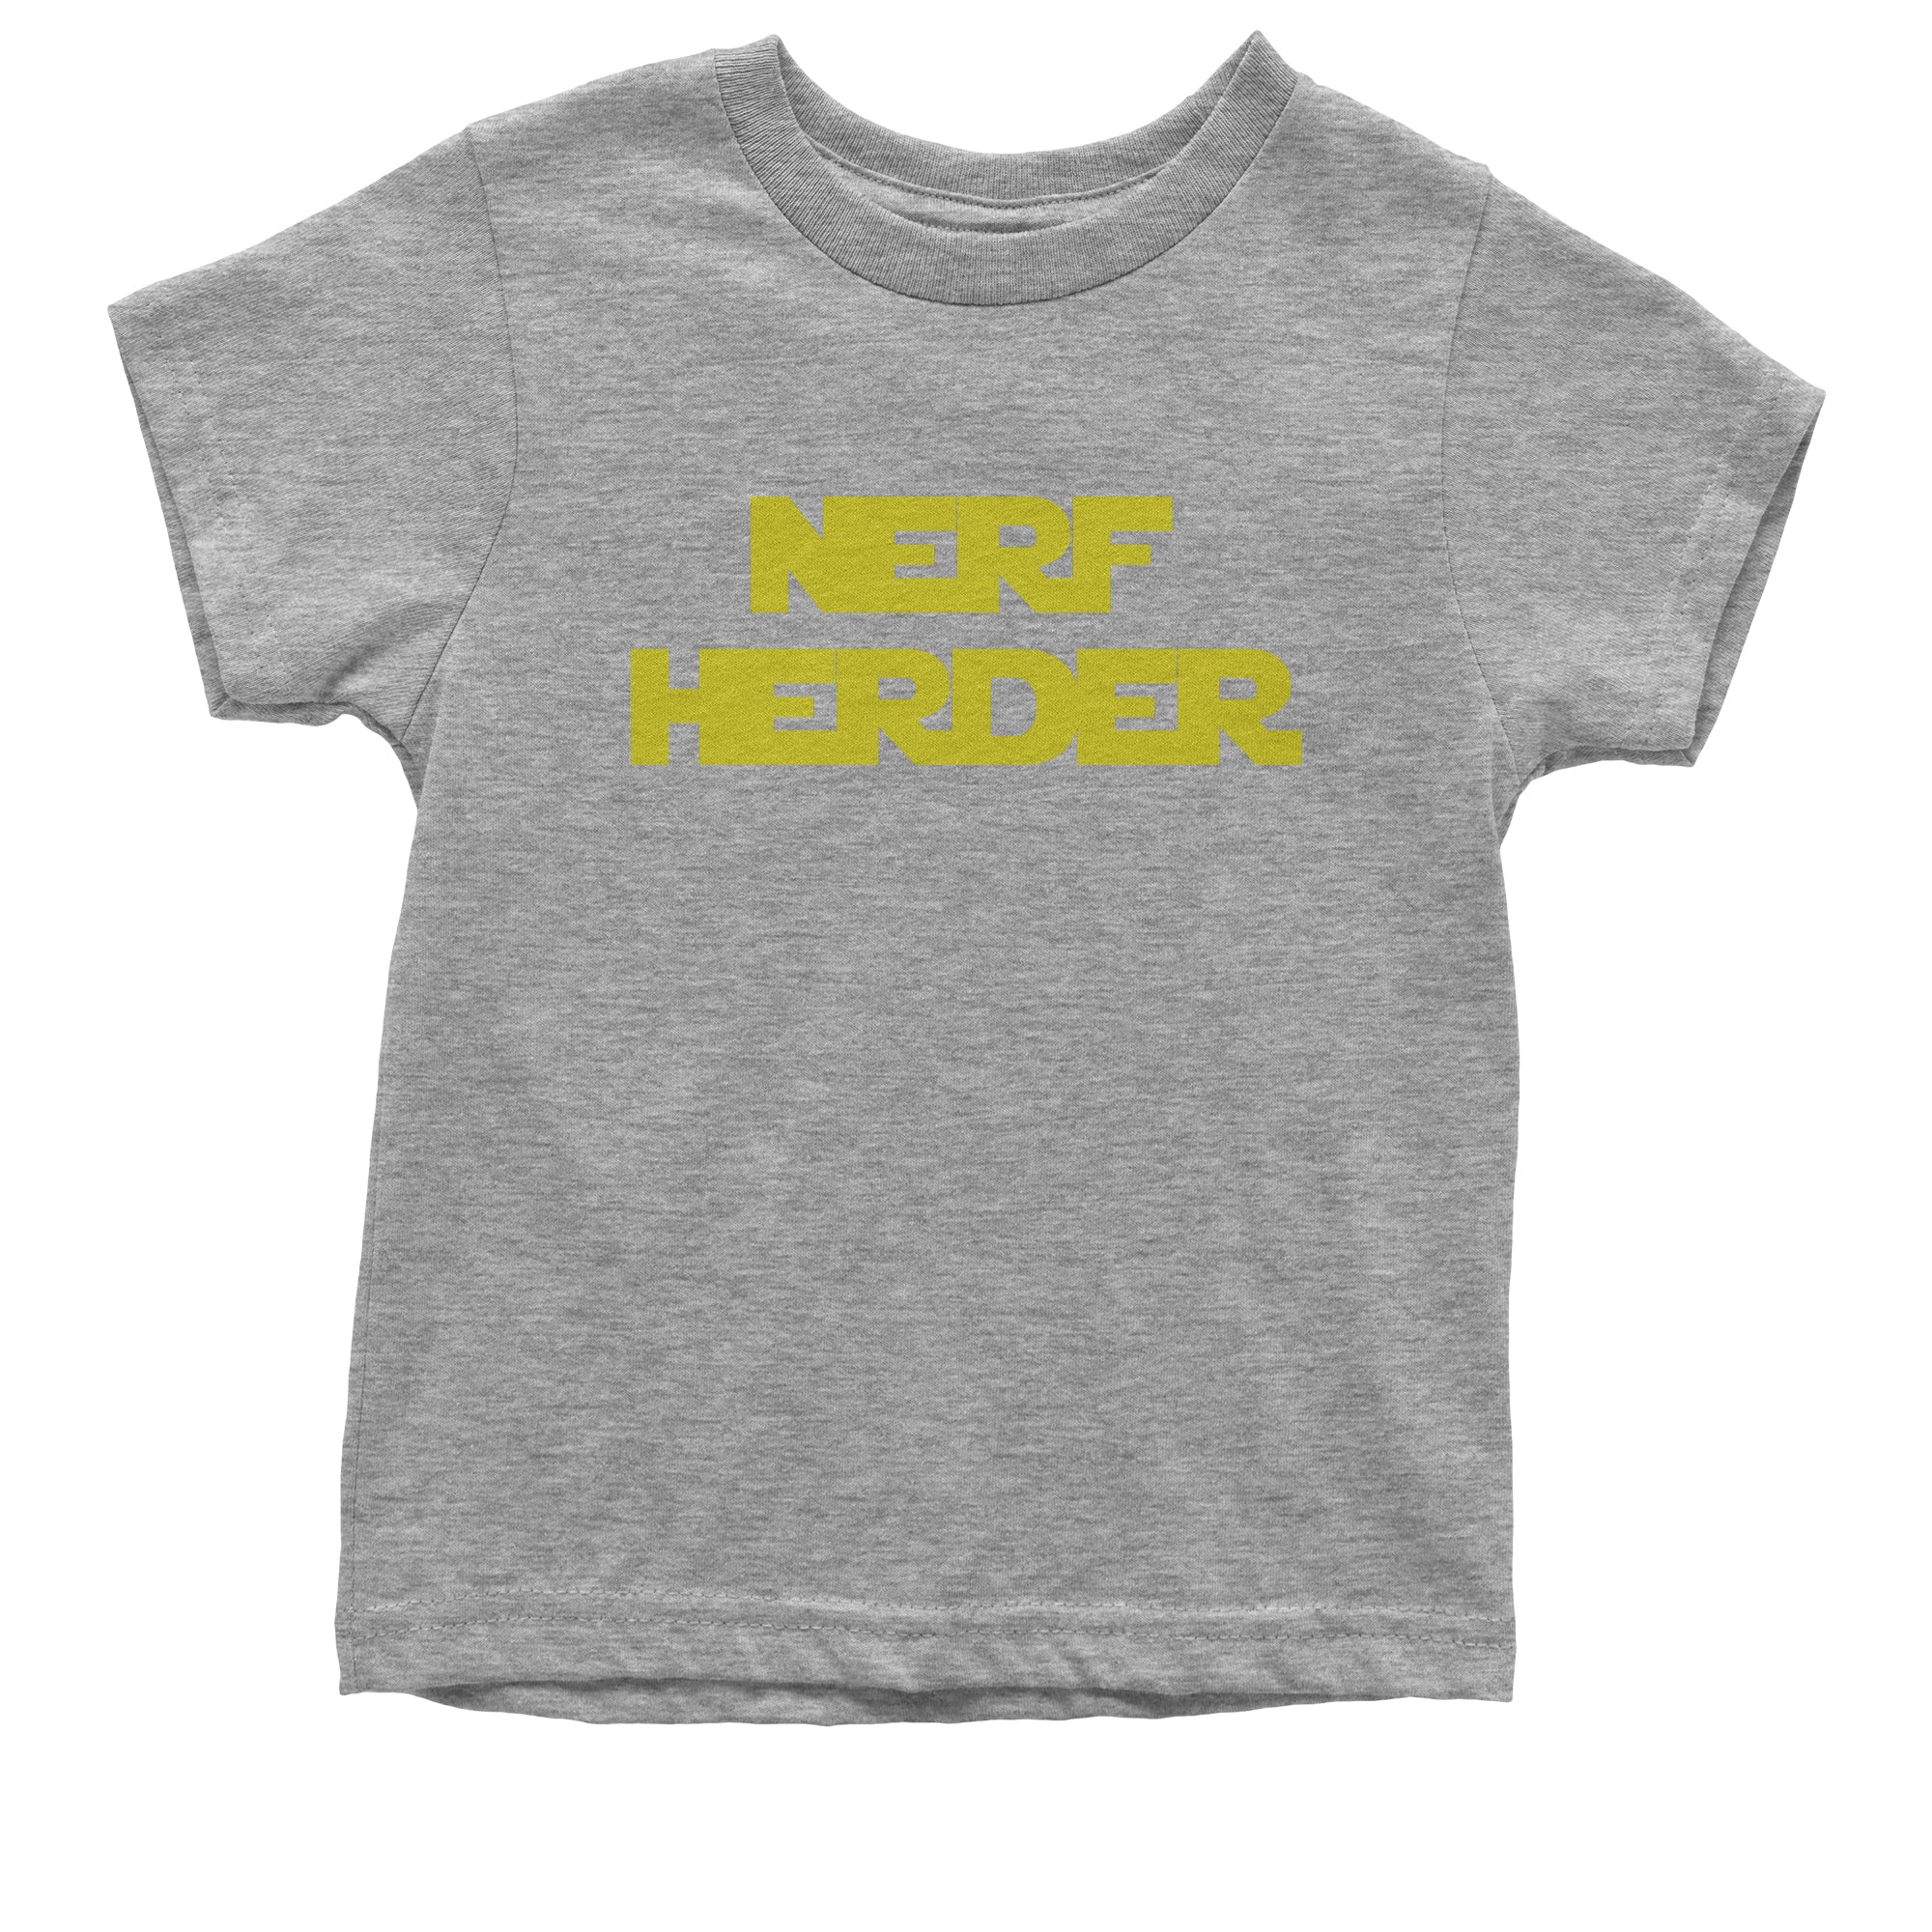 Solo Nerf Herder Quote Kid's T-Shirt